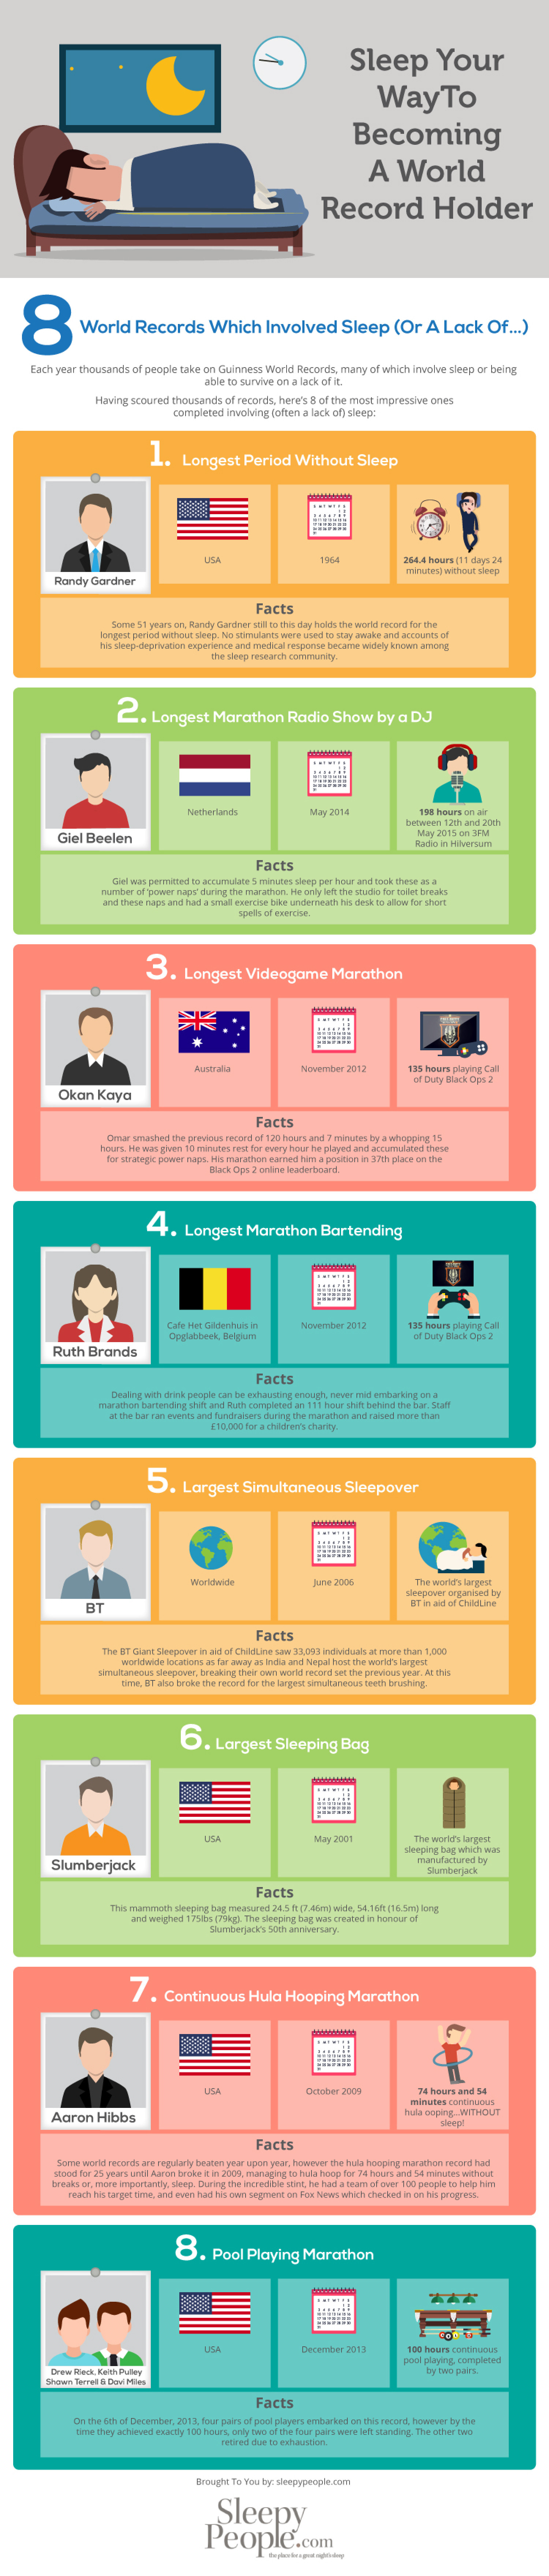 Sleep Your Way To Becoming A World Record Holder Infographic